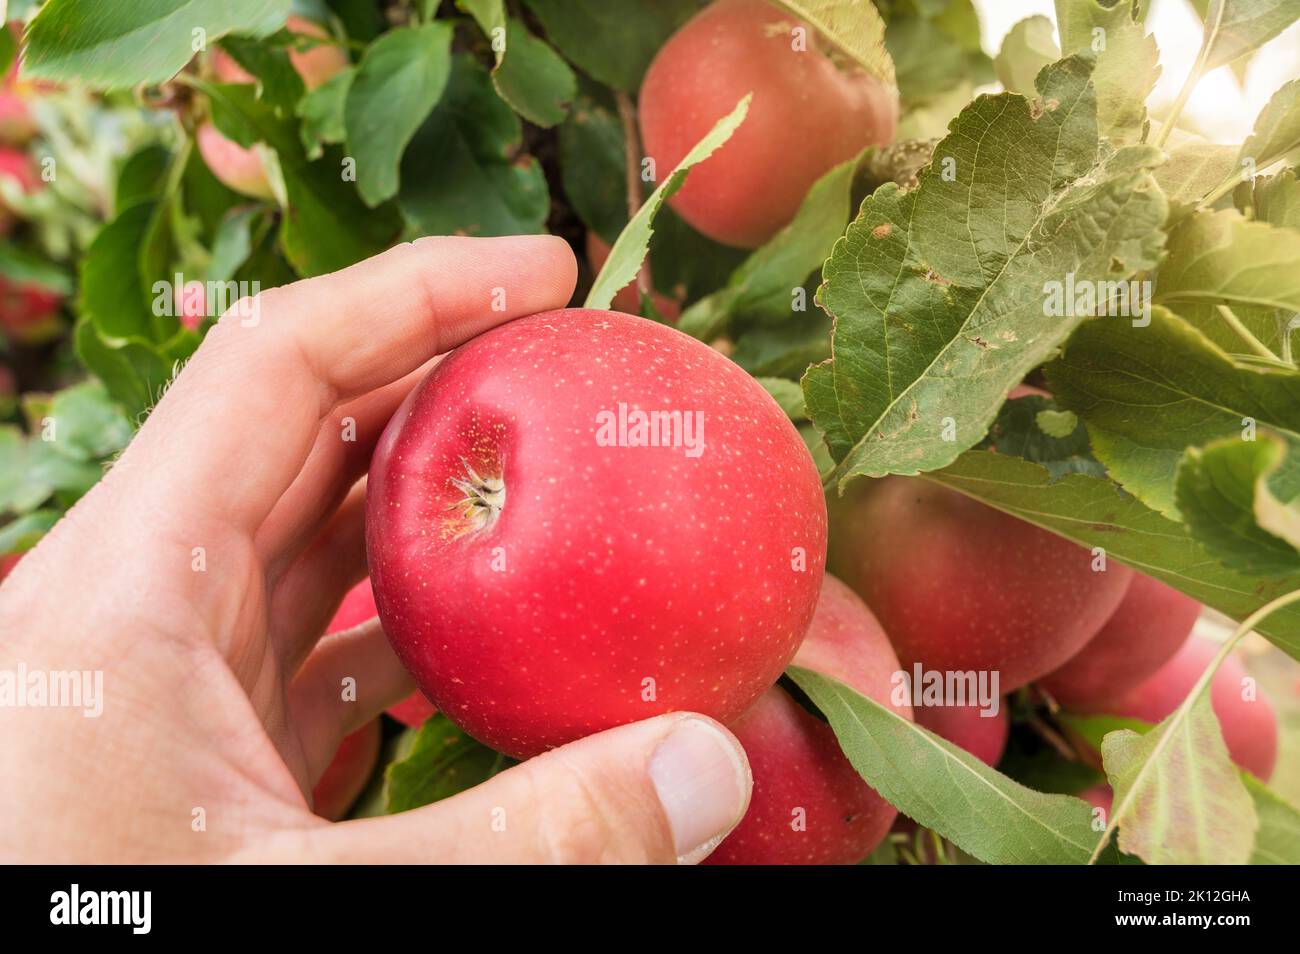 Fresh red apple is picked from an apple tree Stock Photo